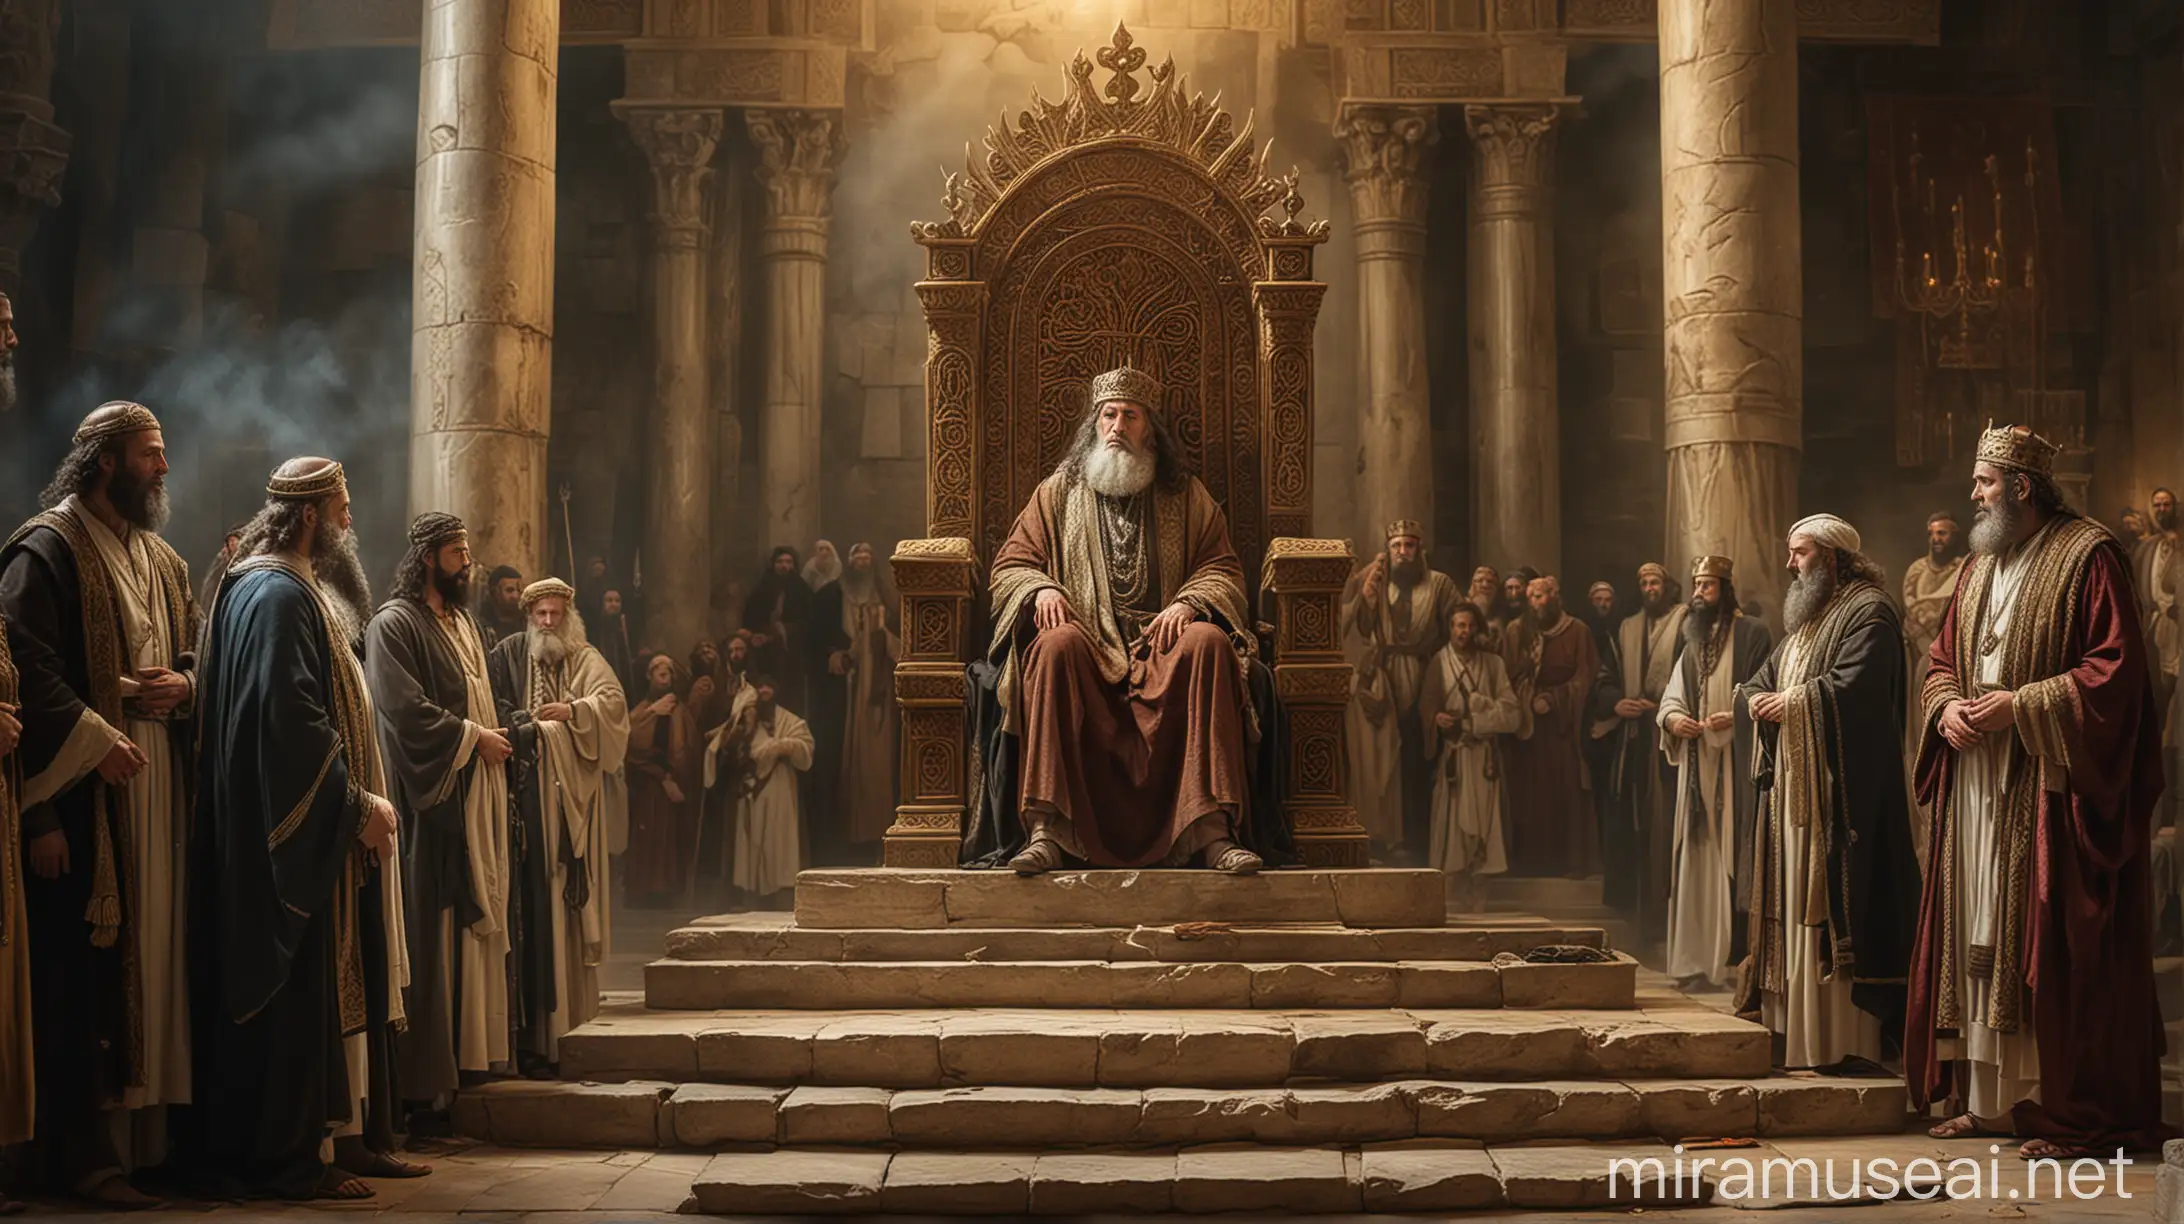 A Jewish prophet standing before Jewish wicked king sit on throne in ancient Jew